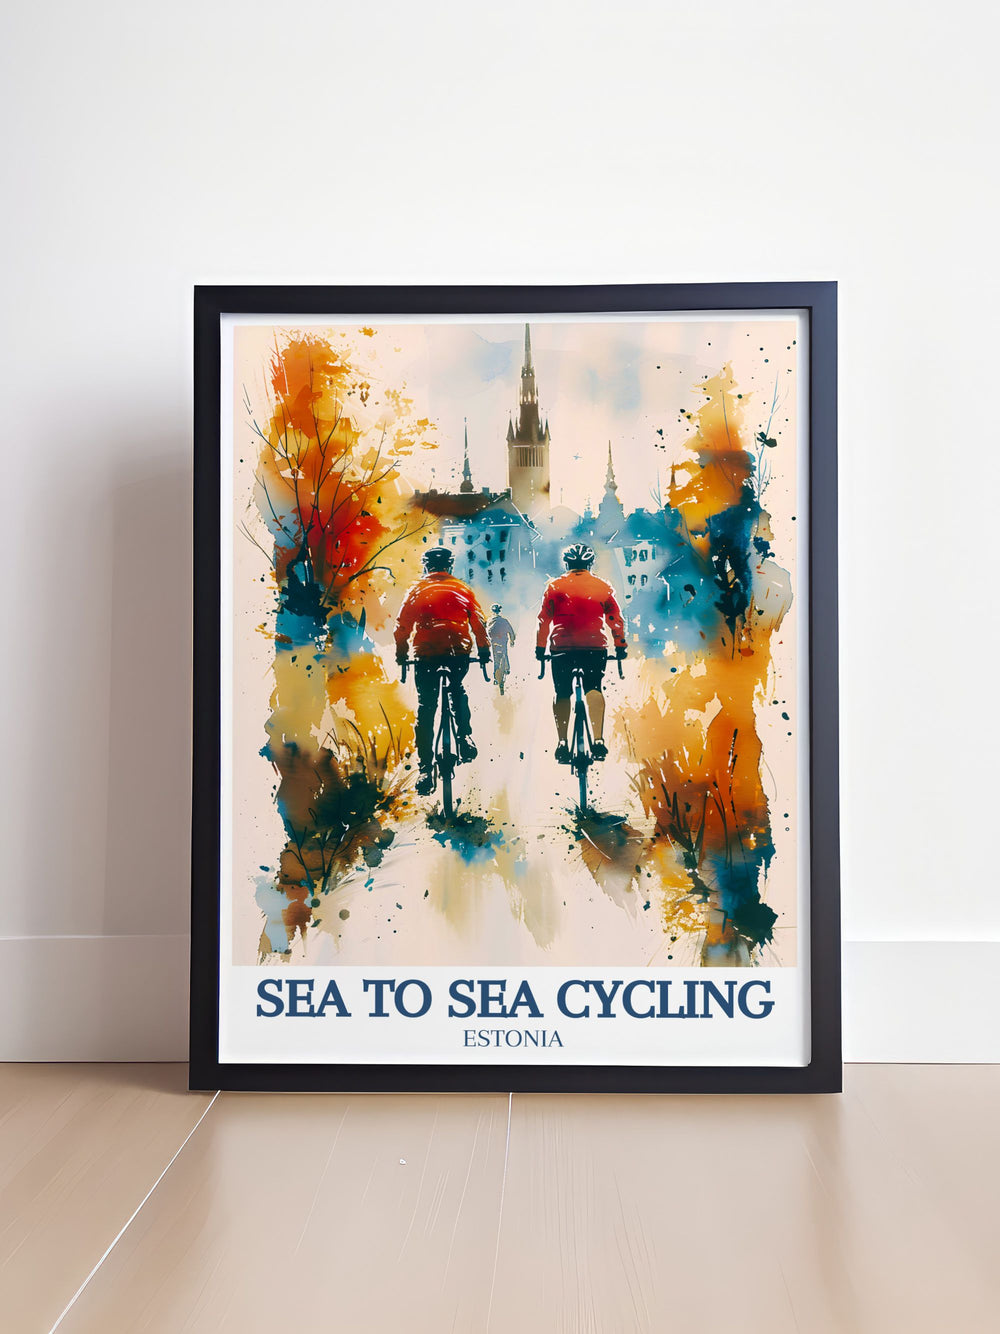 Featuring the Lake District, this poster showcases the tranquil beauty and rolling hills that cyclists encounter on the Sea to Sea Cycling Route, offering a glimpse into the serene landscapes of England.